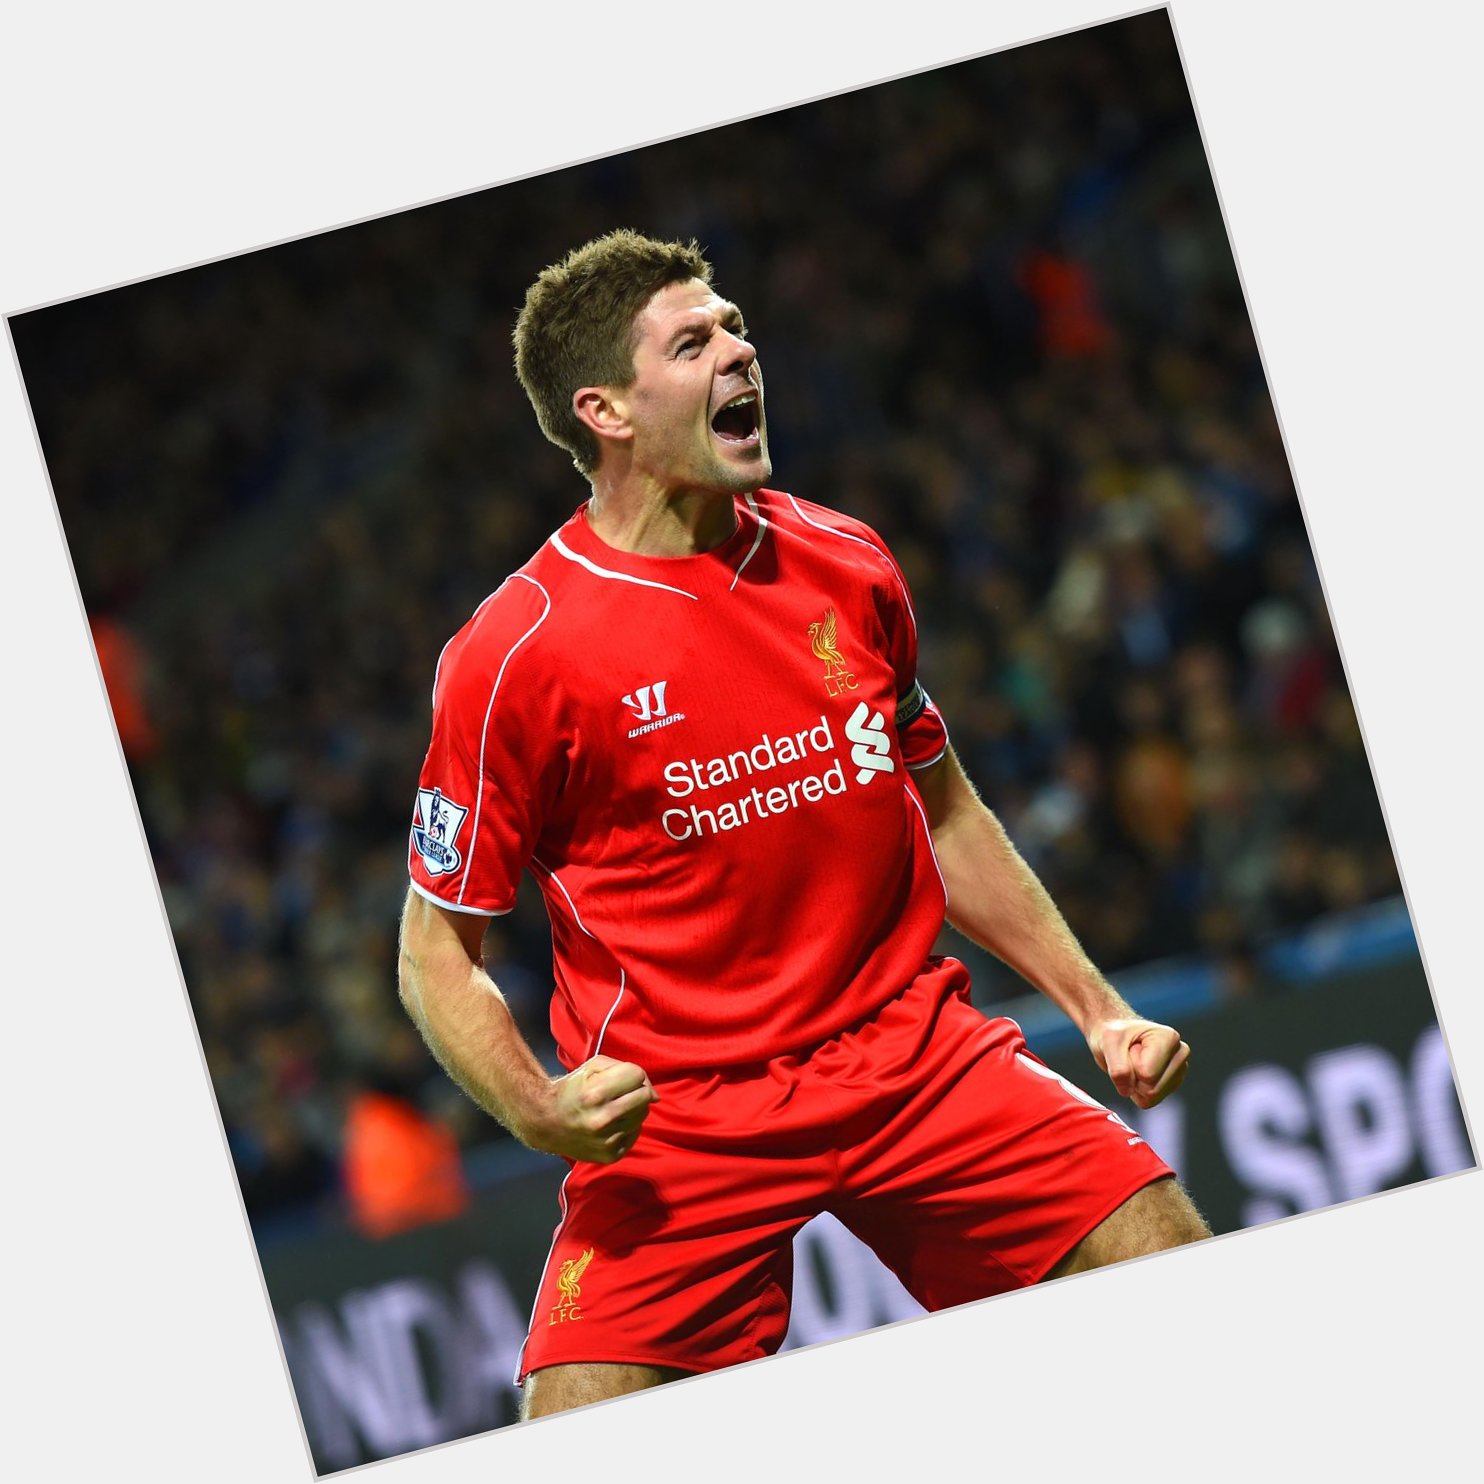 A big happy birthday to Steven Gerrard, who turns 39 today 